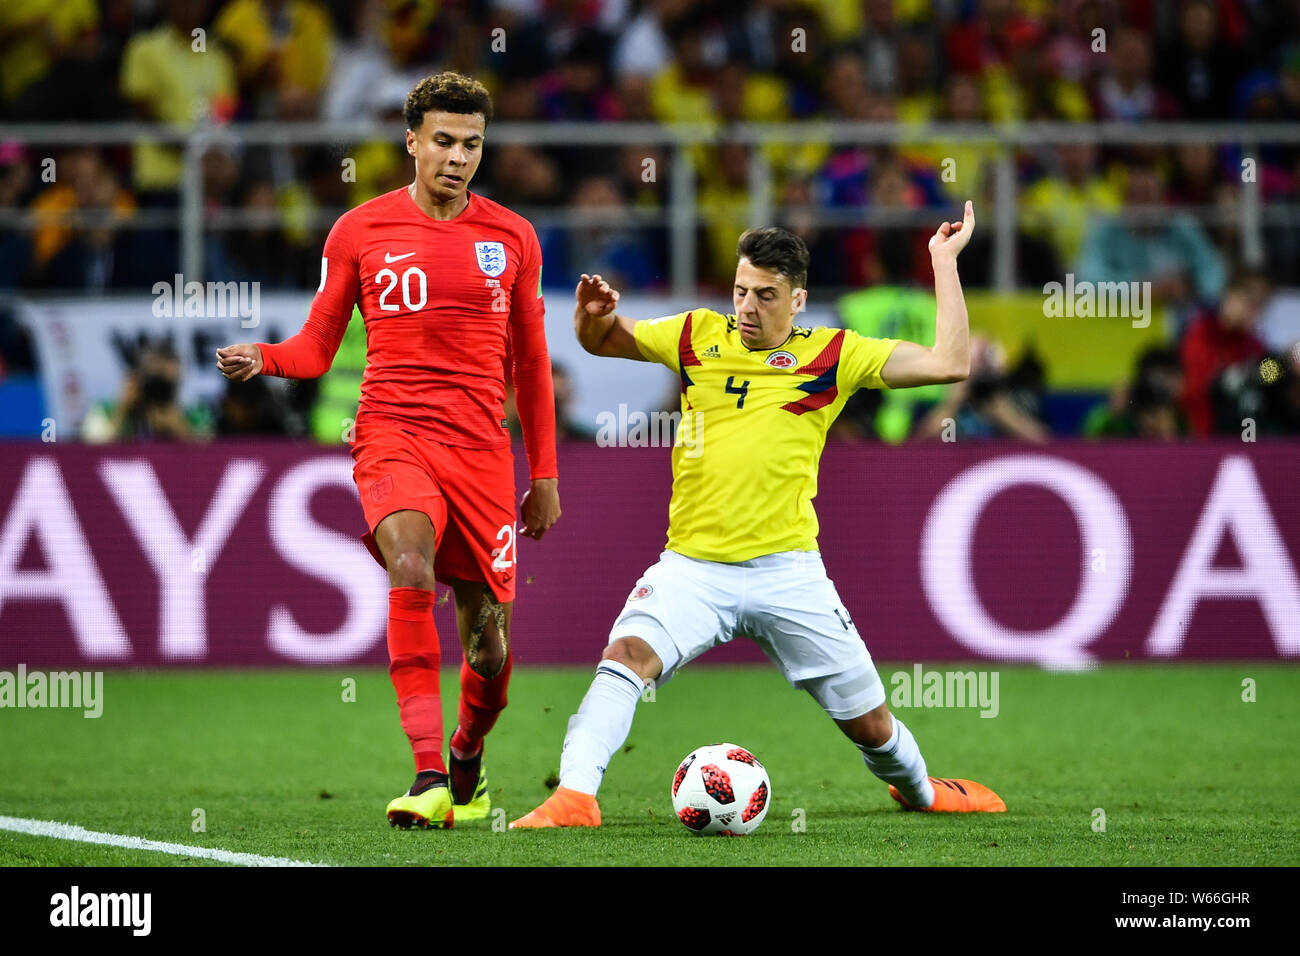 Santiago Arias of England, right, challenges Dele Alli of Columbia in their Round of 16 match during the 2018 FIFA World Cup in Moscow, Russia, 3 July Stock Photo